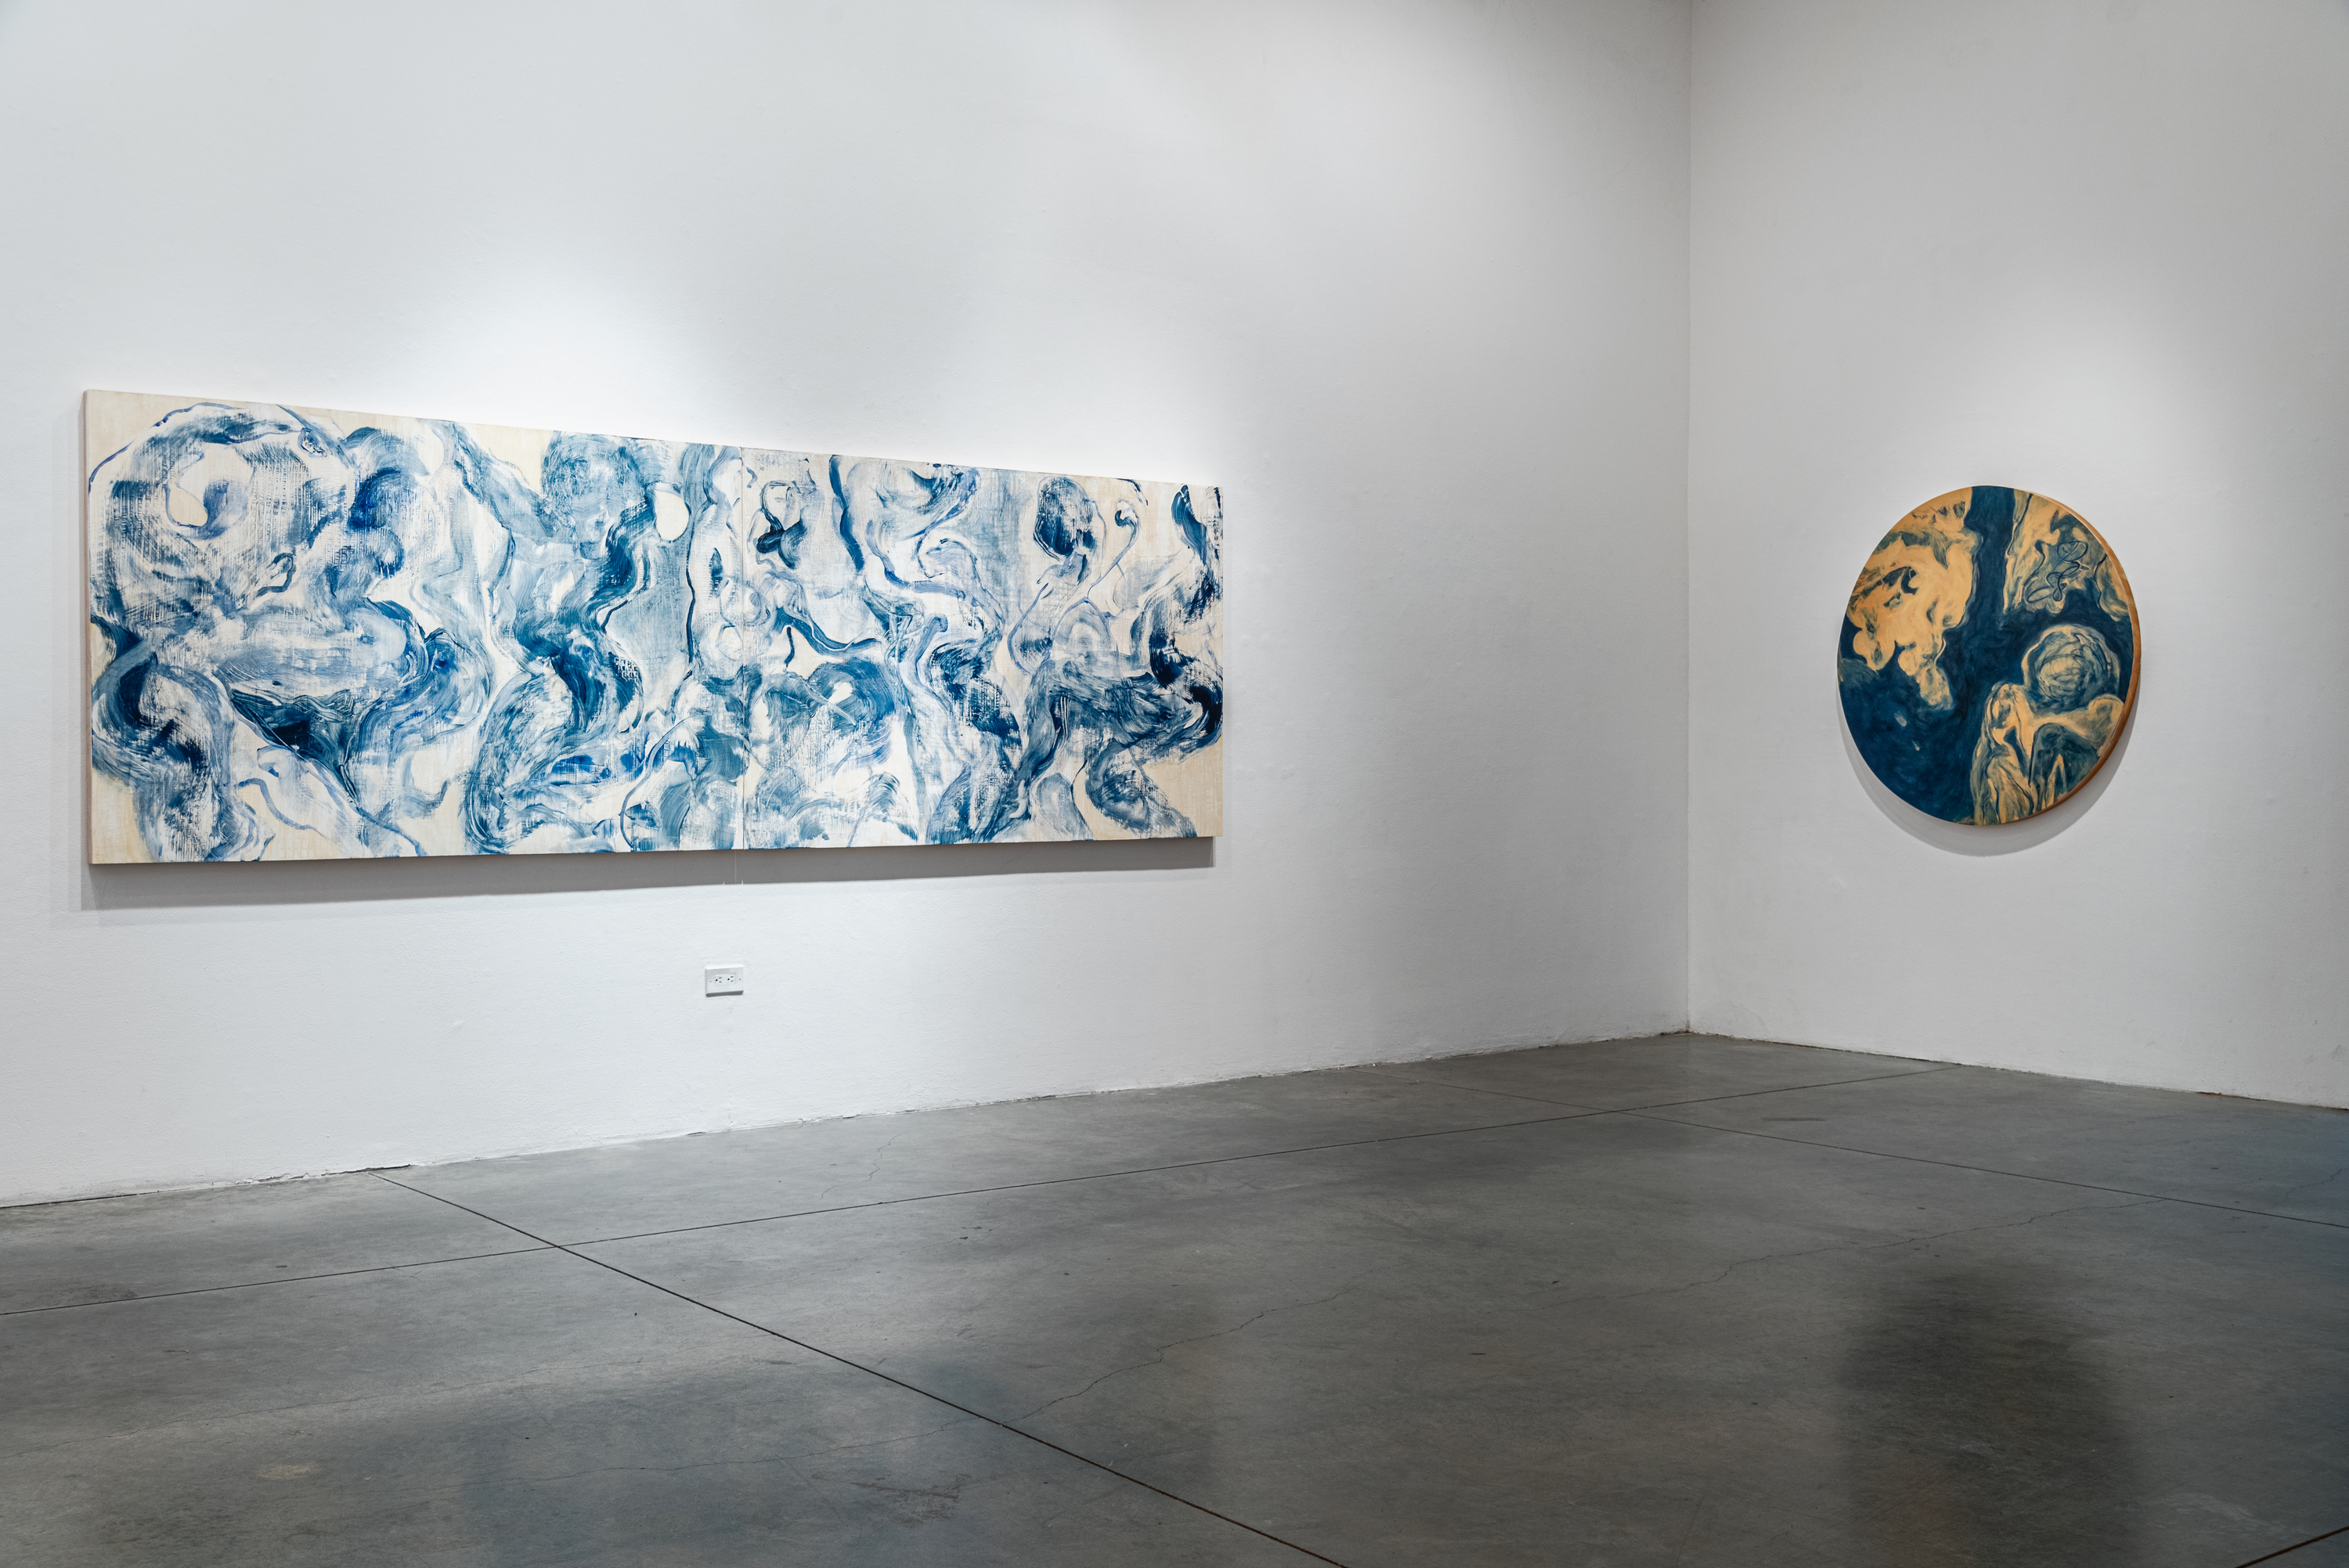 Installation view of 2 paintings done in the key of blue in a gallery